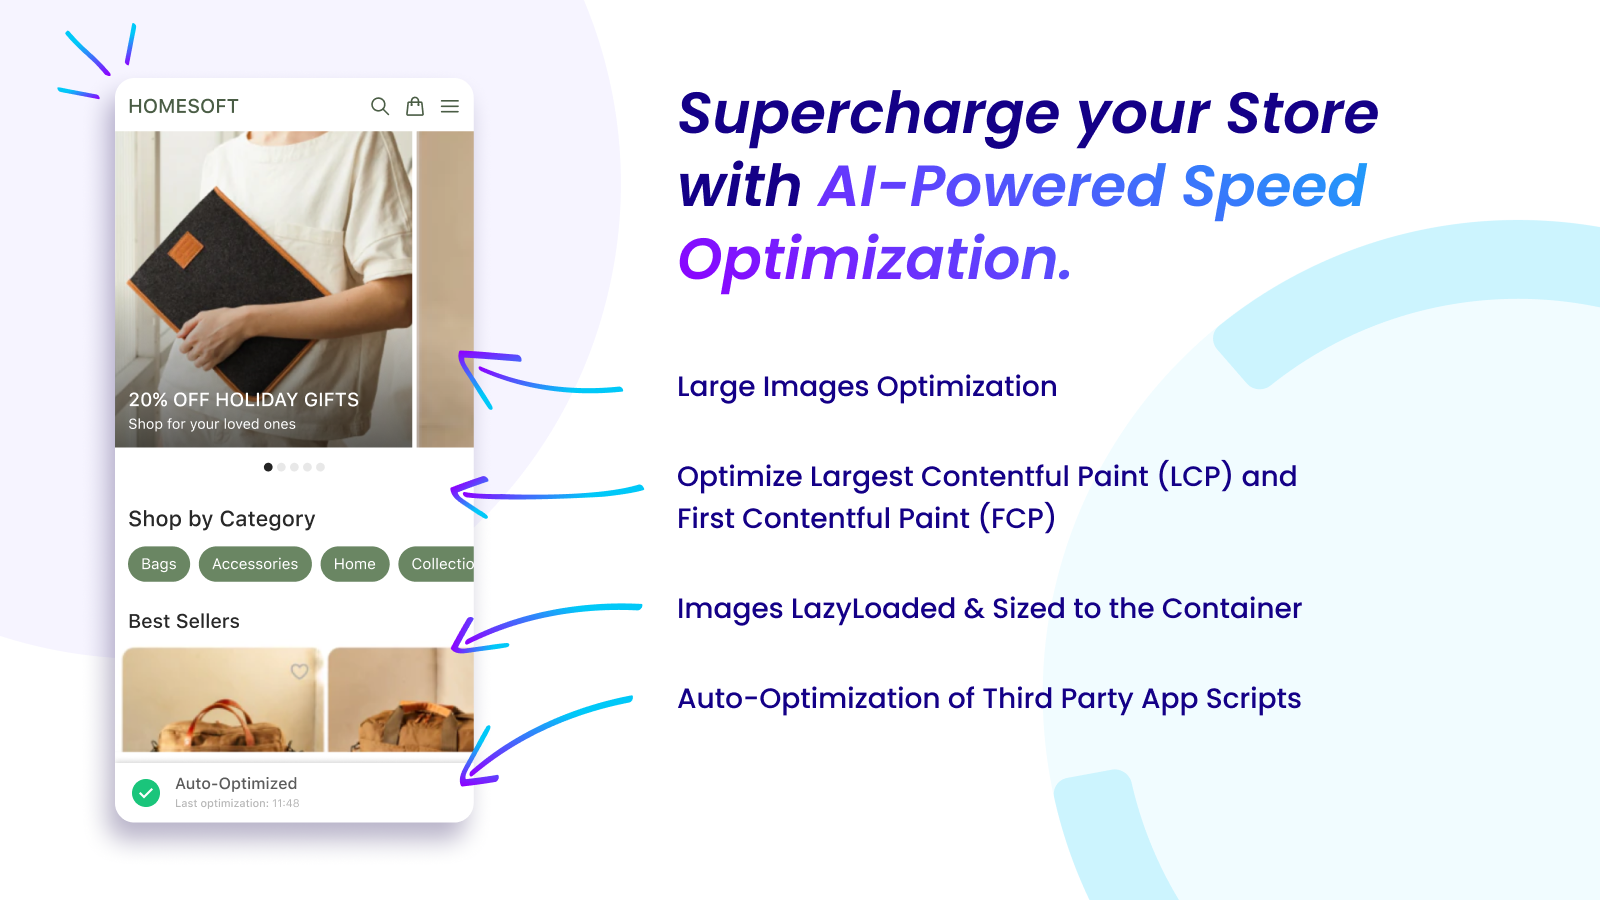 Supercharge our store with AI-Powered Speed Optimization